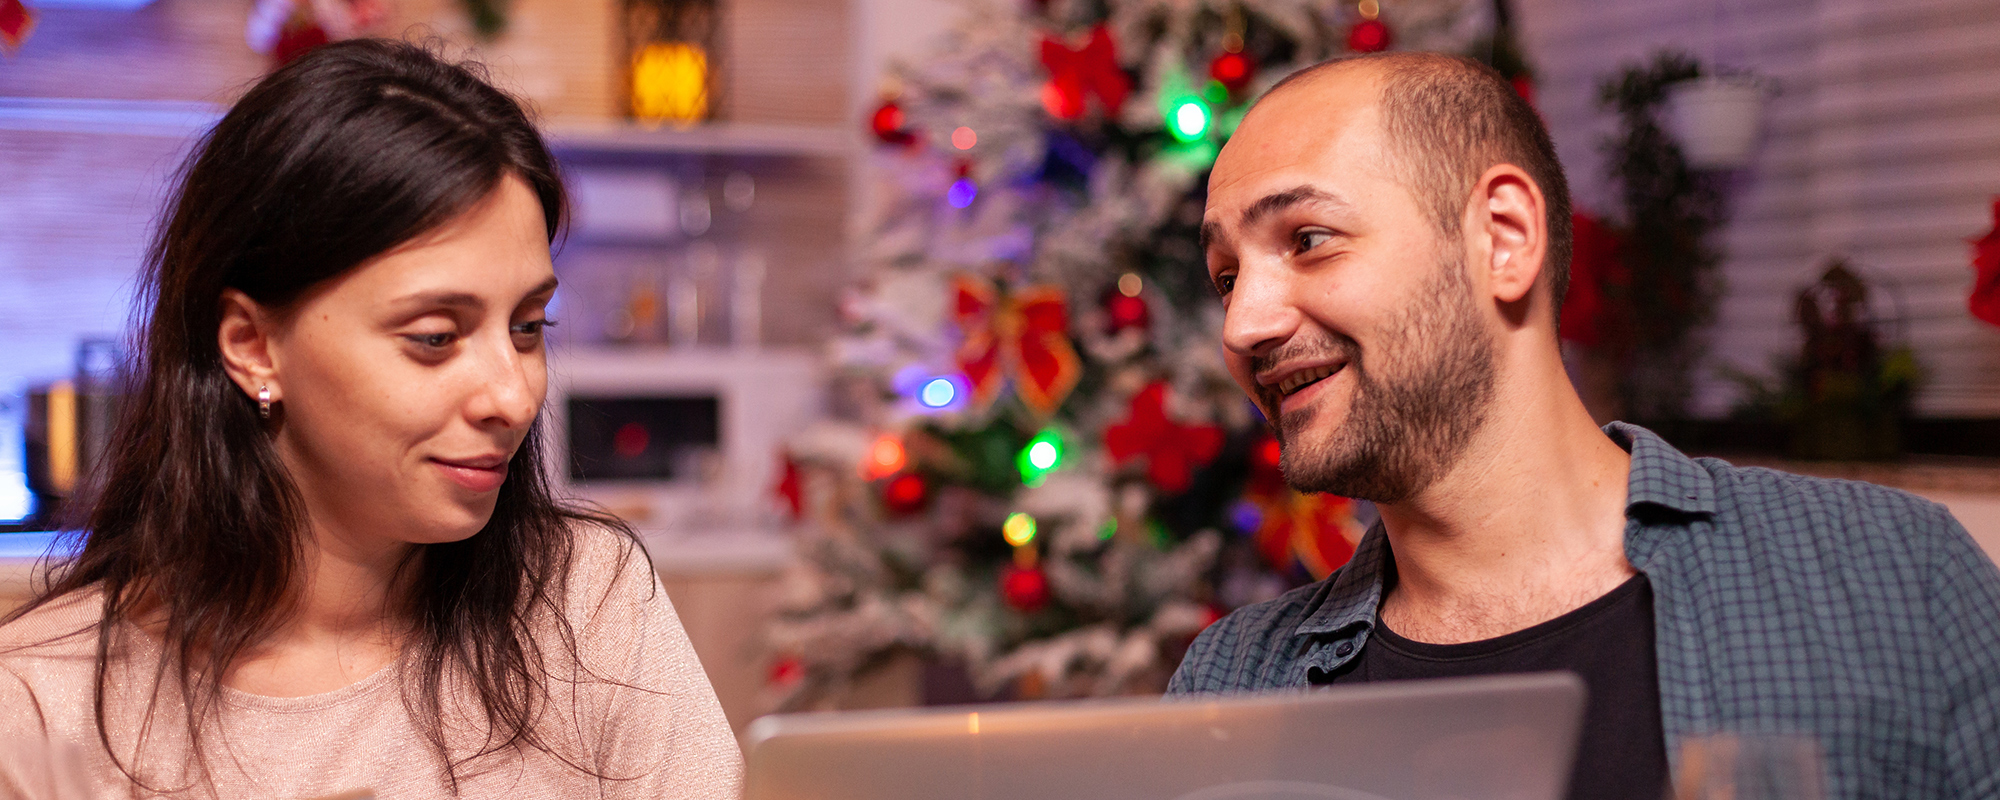 A man and woman sitting at a kitchen table talking about something while looking at their laptop. There is a Christmas tree up in the background.